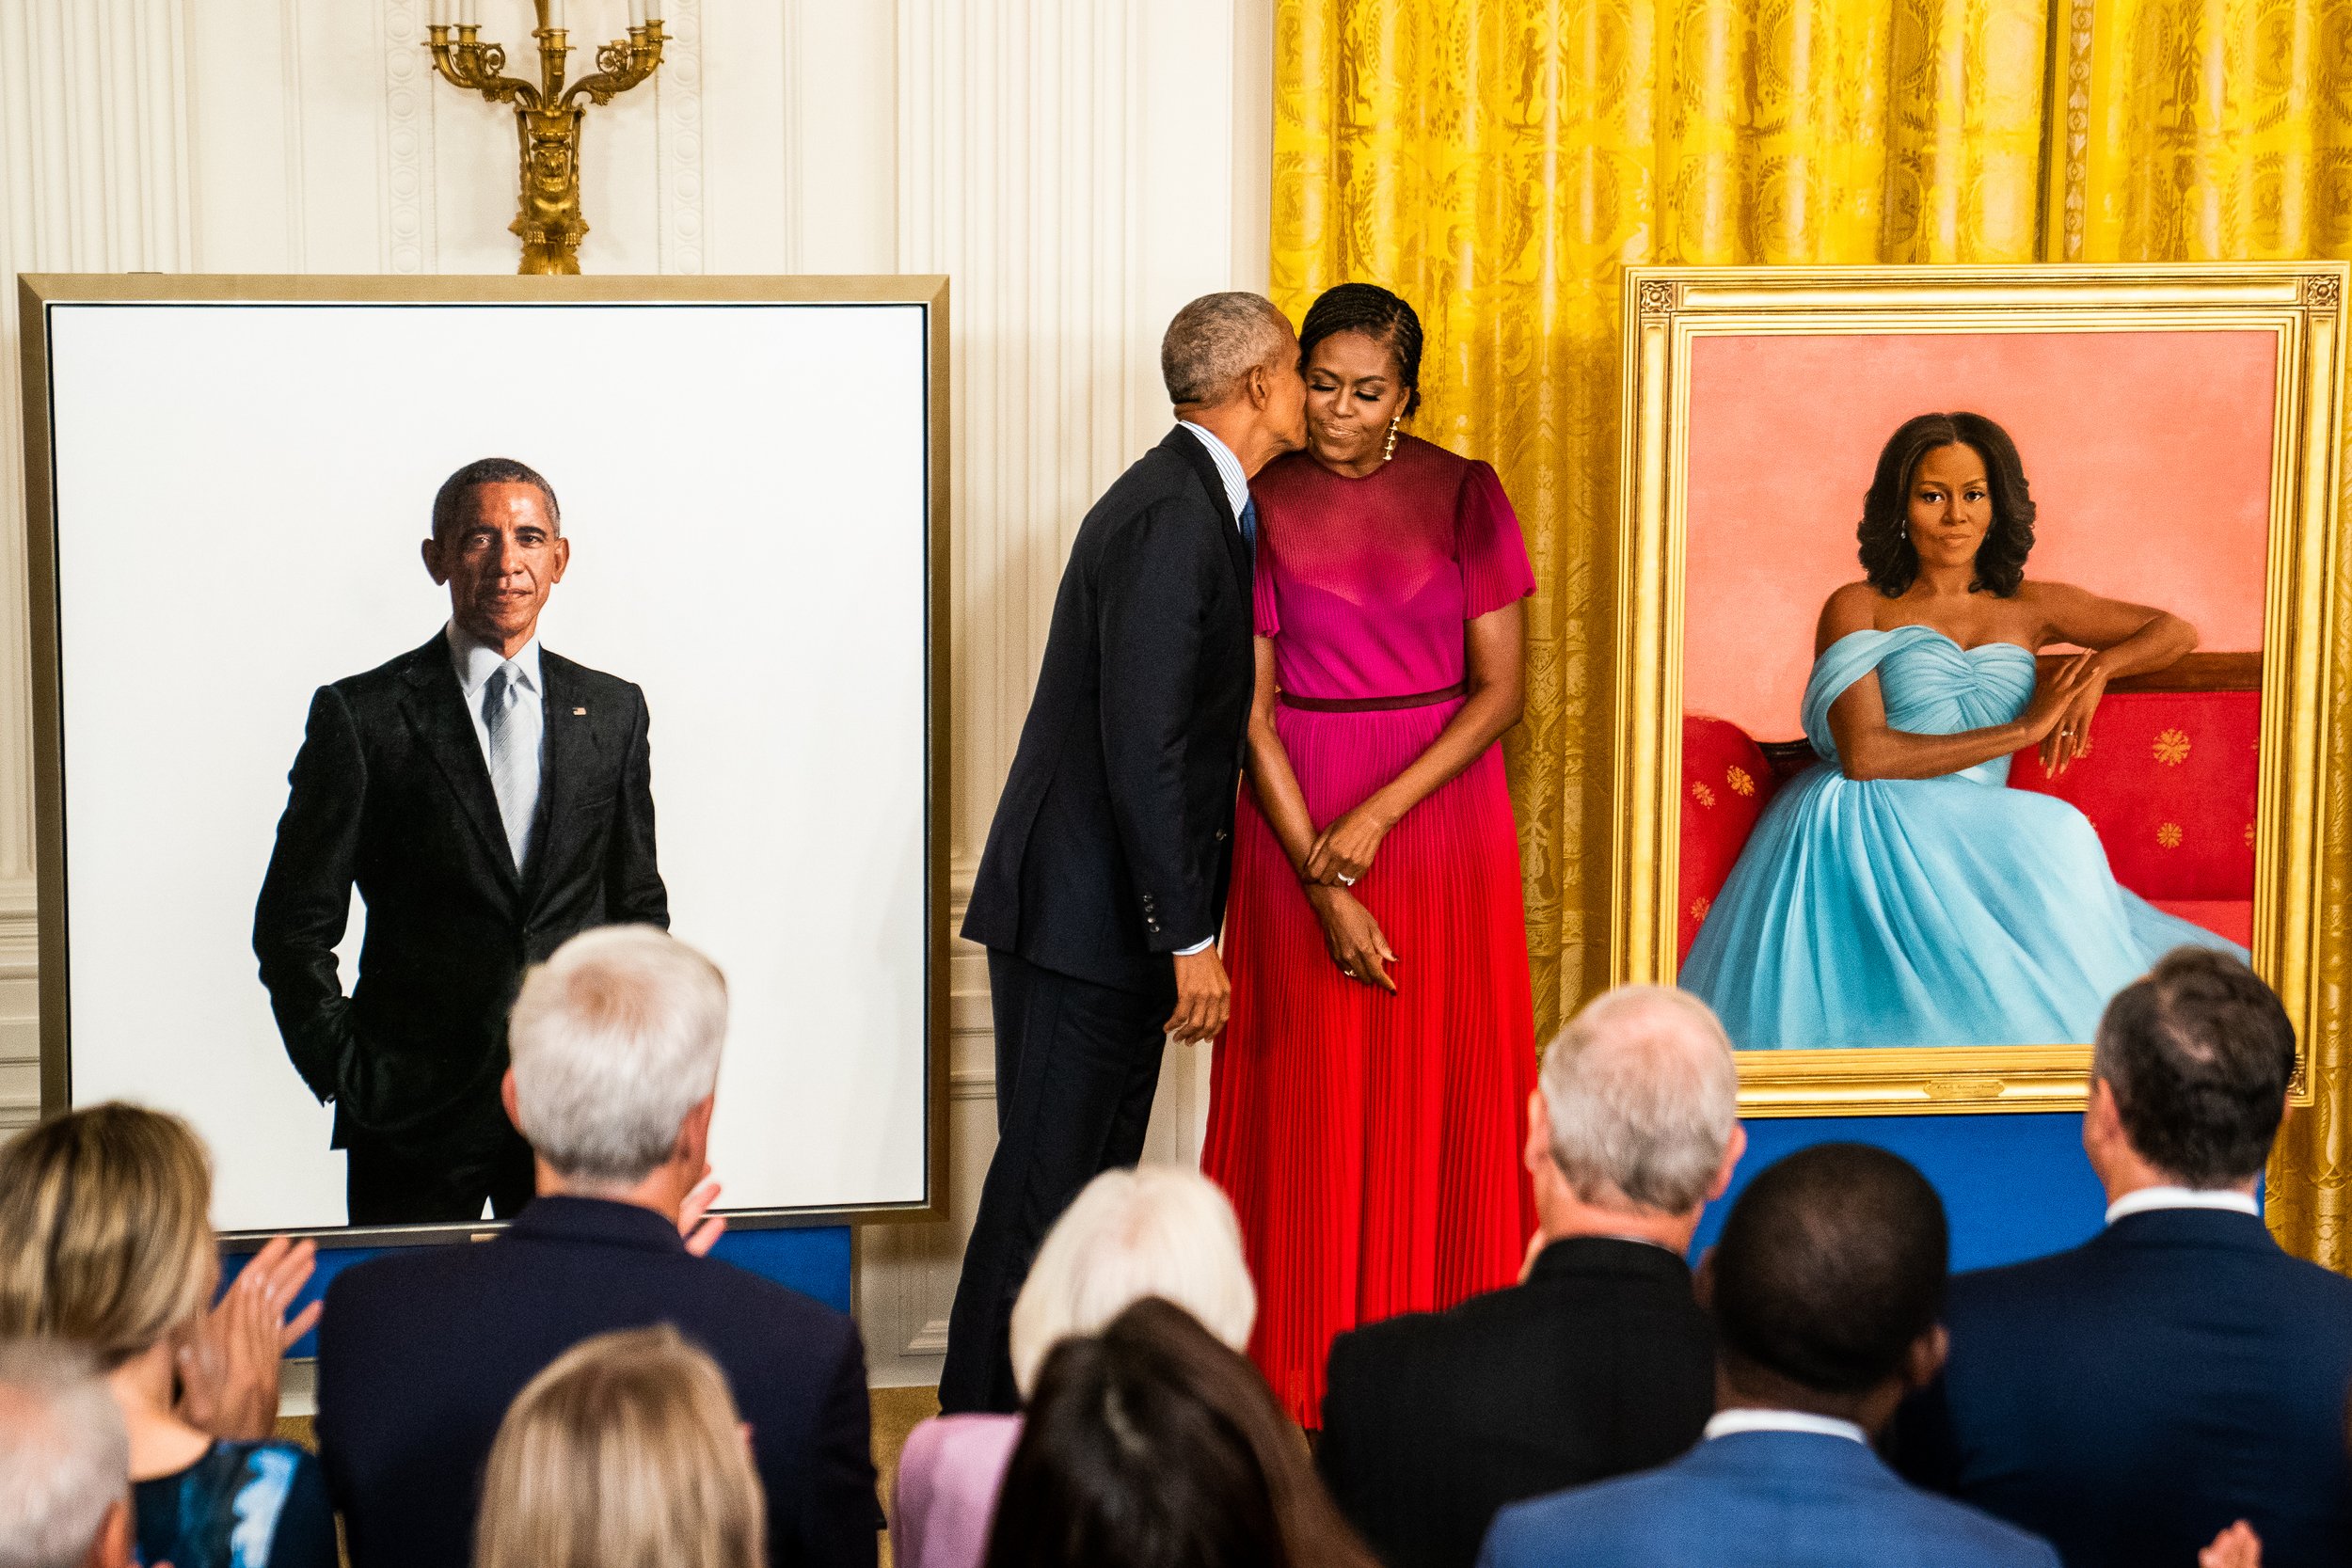  Former President Barack Obama kisses his wife former first lady Michelle Obama after they unveiled their official White House portraits during a ceremony in the East Room of the White House. 